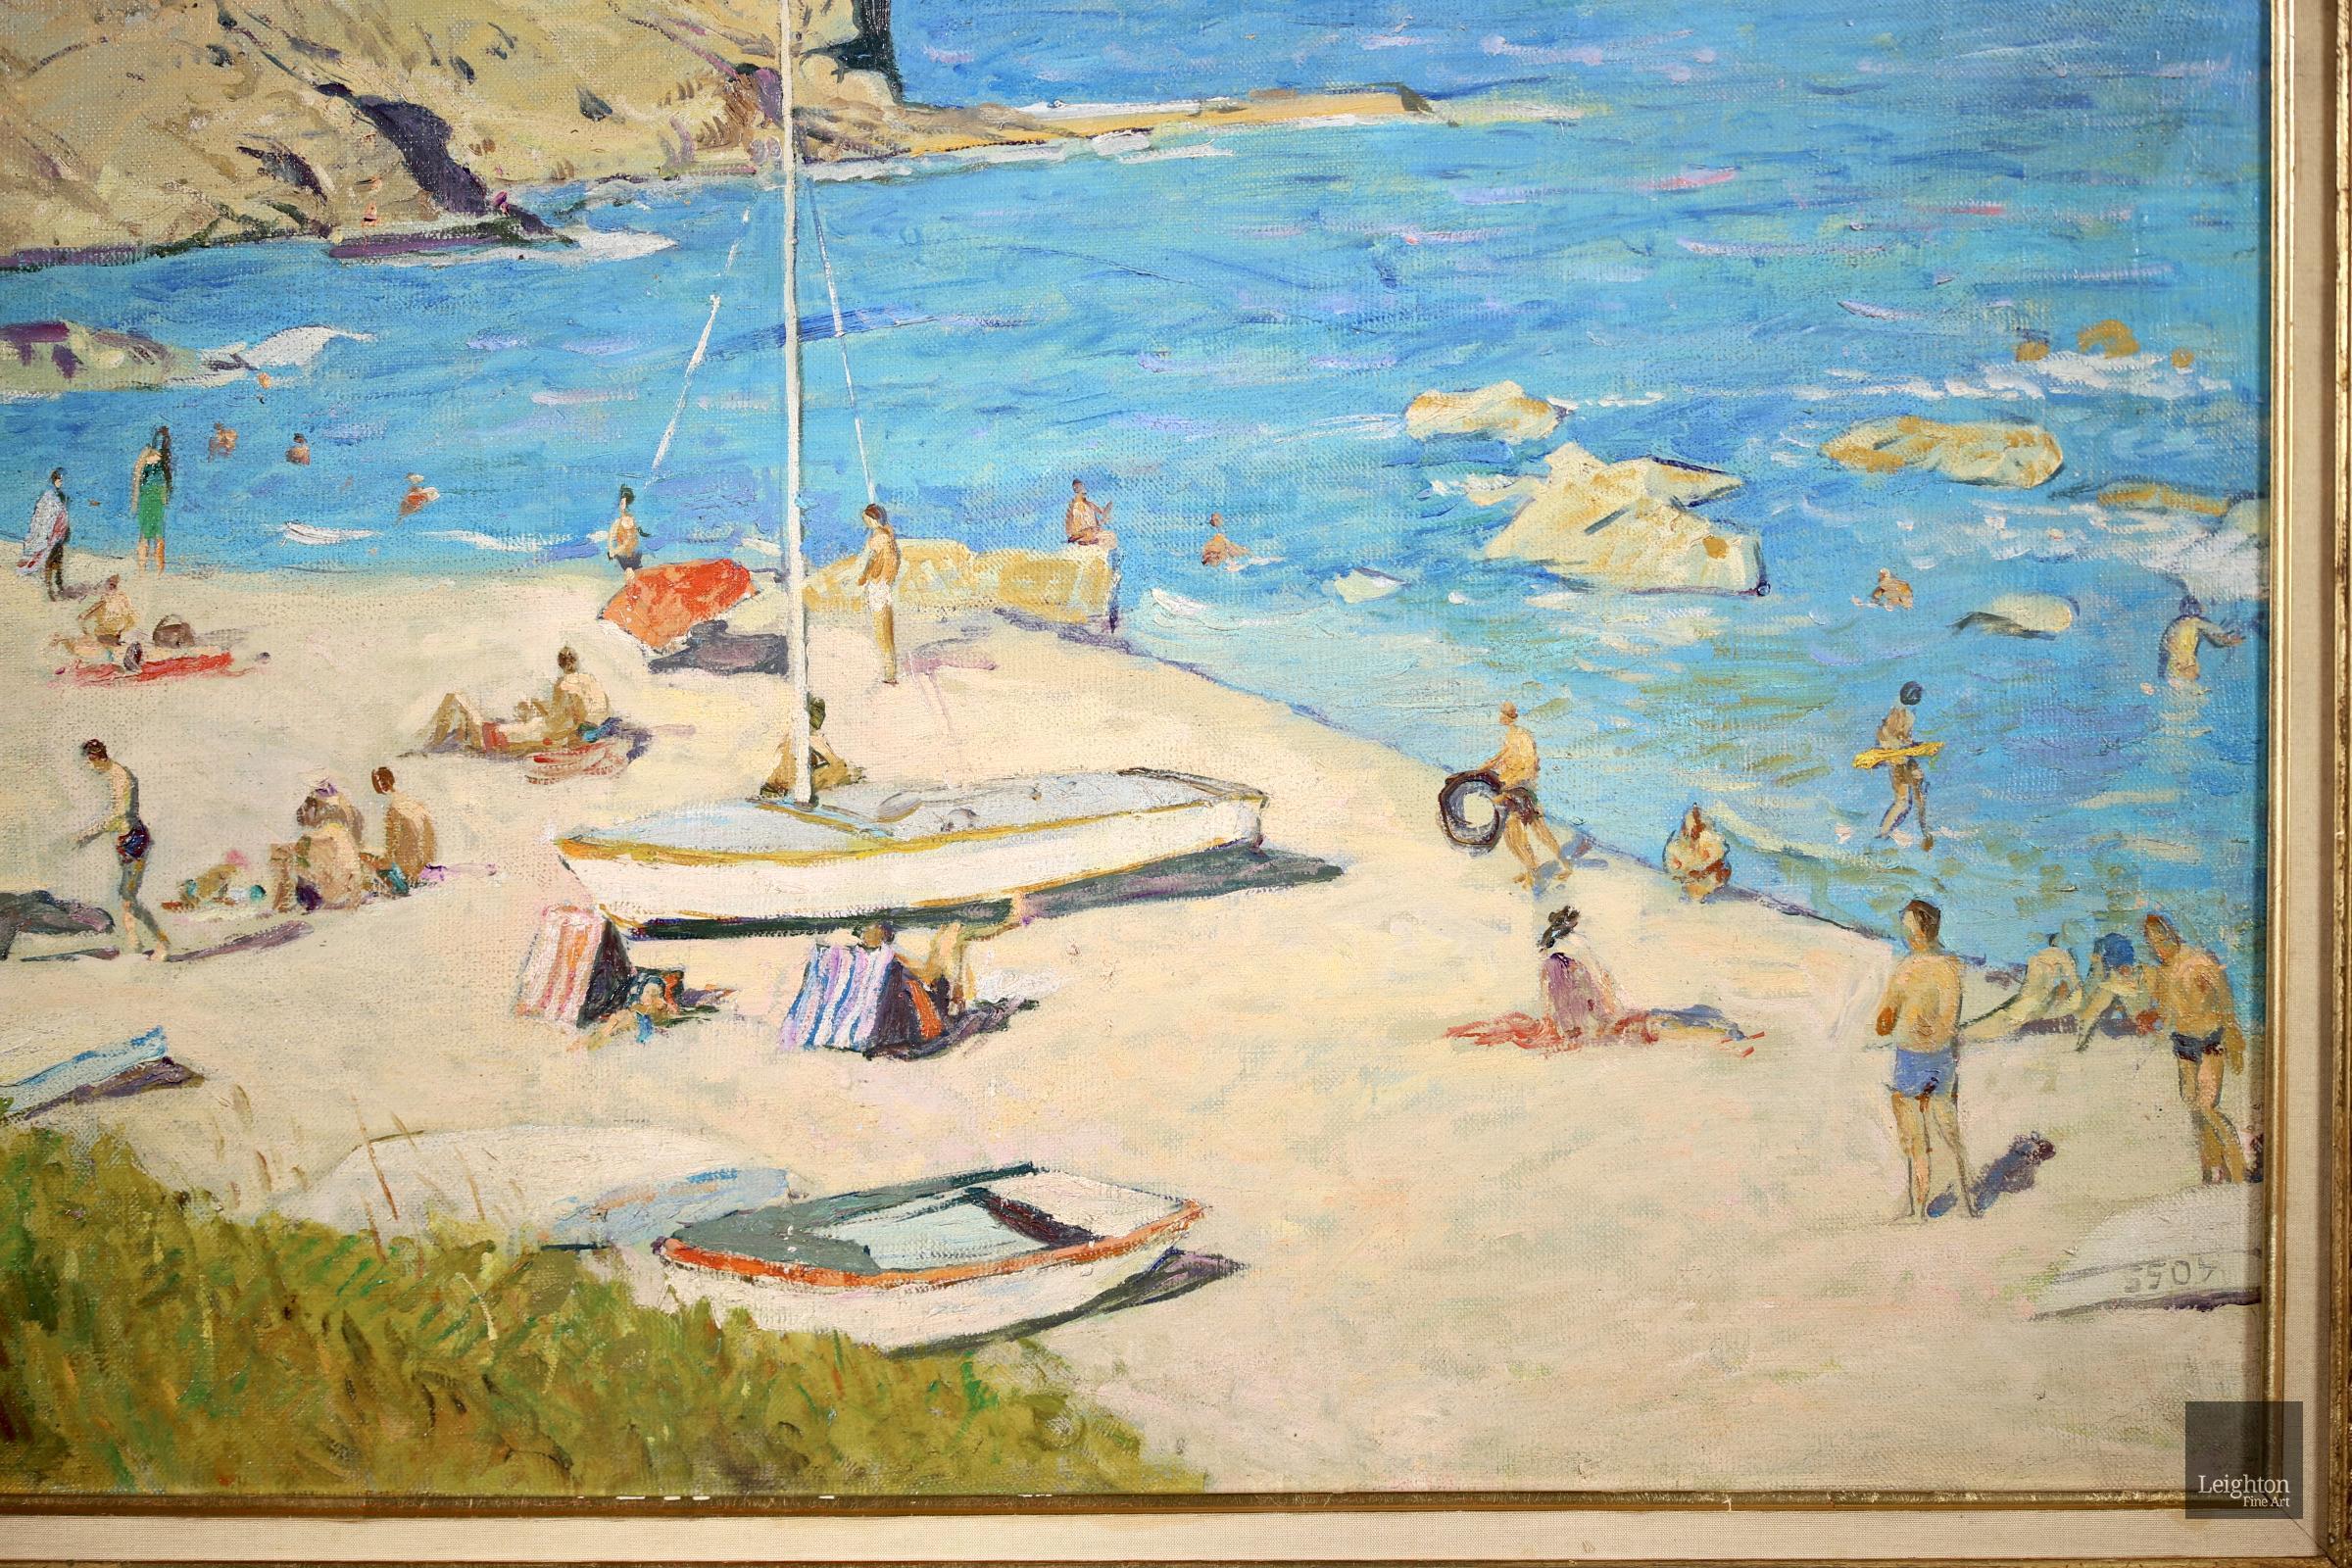 Wonderful signed figures in landscape oil on canvas circa 1940 by French post impressionist painter Lucien Adrion. The painting depicts families enjoying a sunny summer's day at the beach - some are relaxing on the golden sand while children build